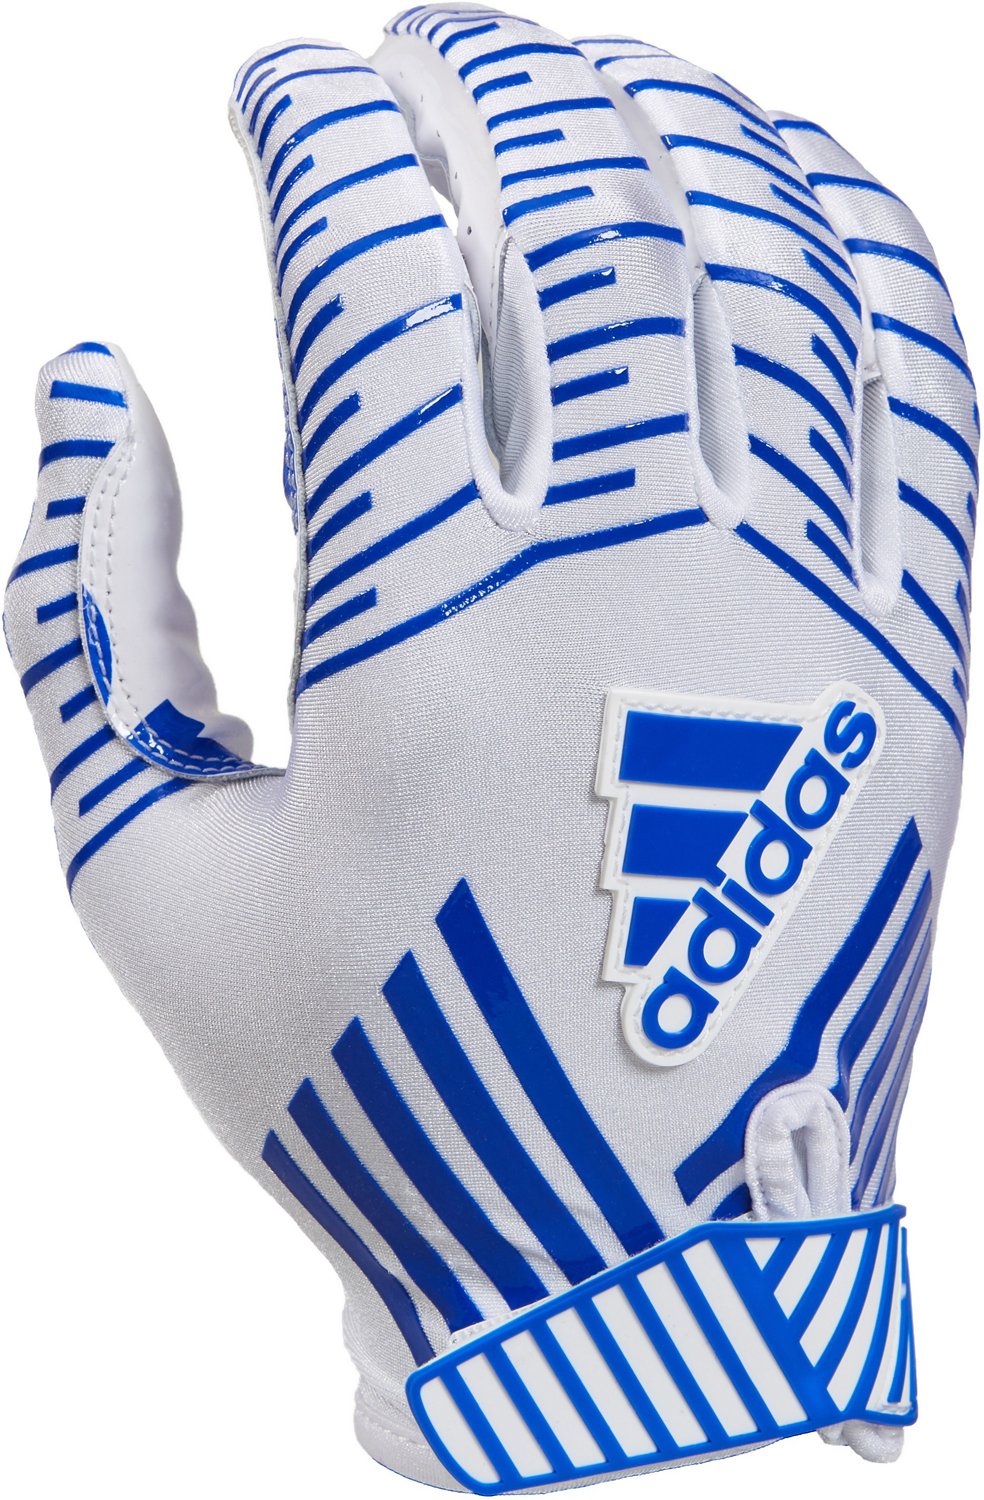 adidas filthy quick gloves